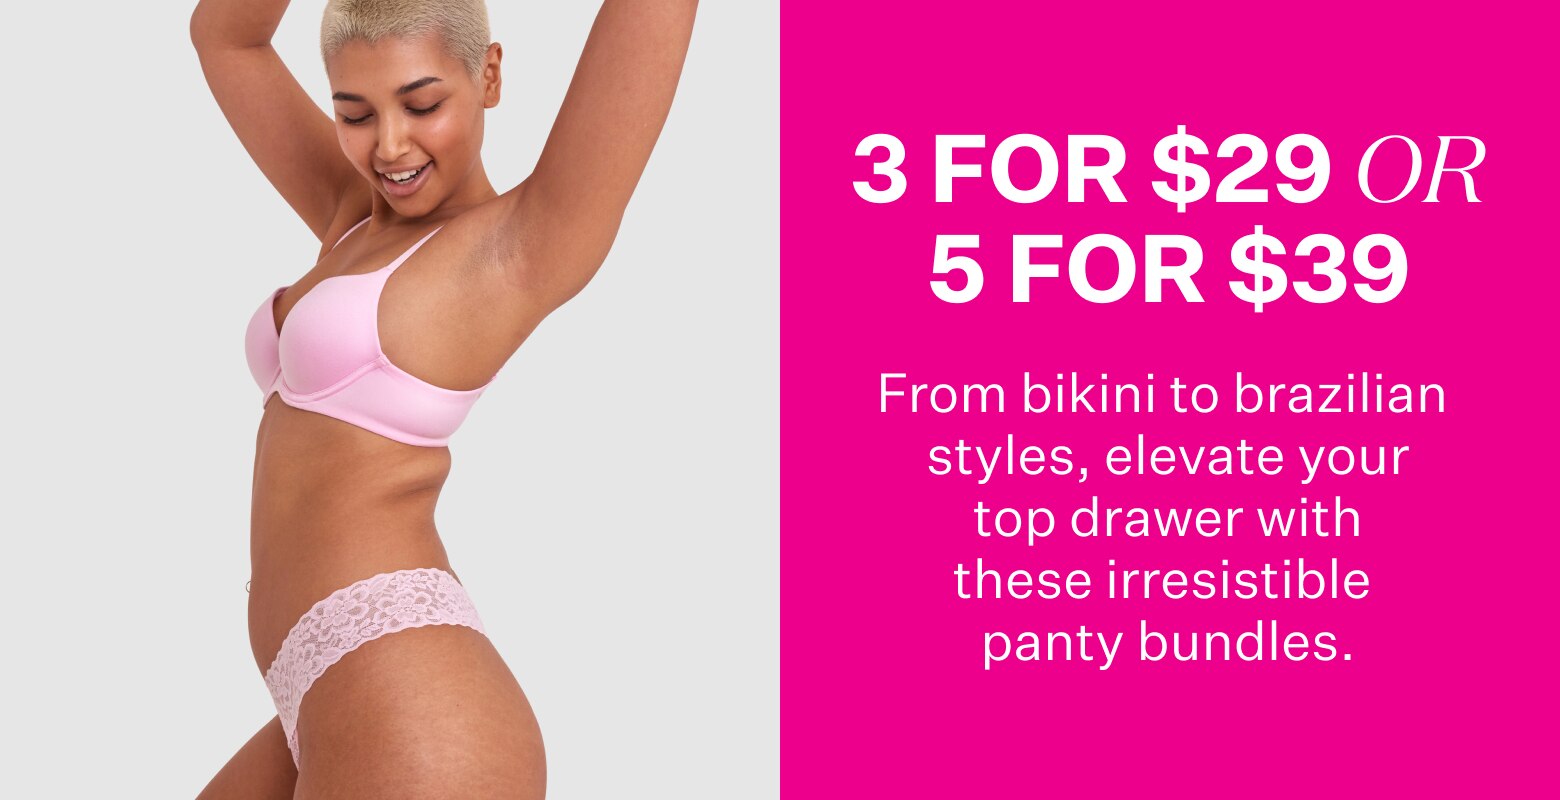 3 For $29 or 5 For $39. From bikini to brazilian styles, elevate your top drawer with these irresistible panty bundles.